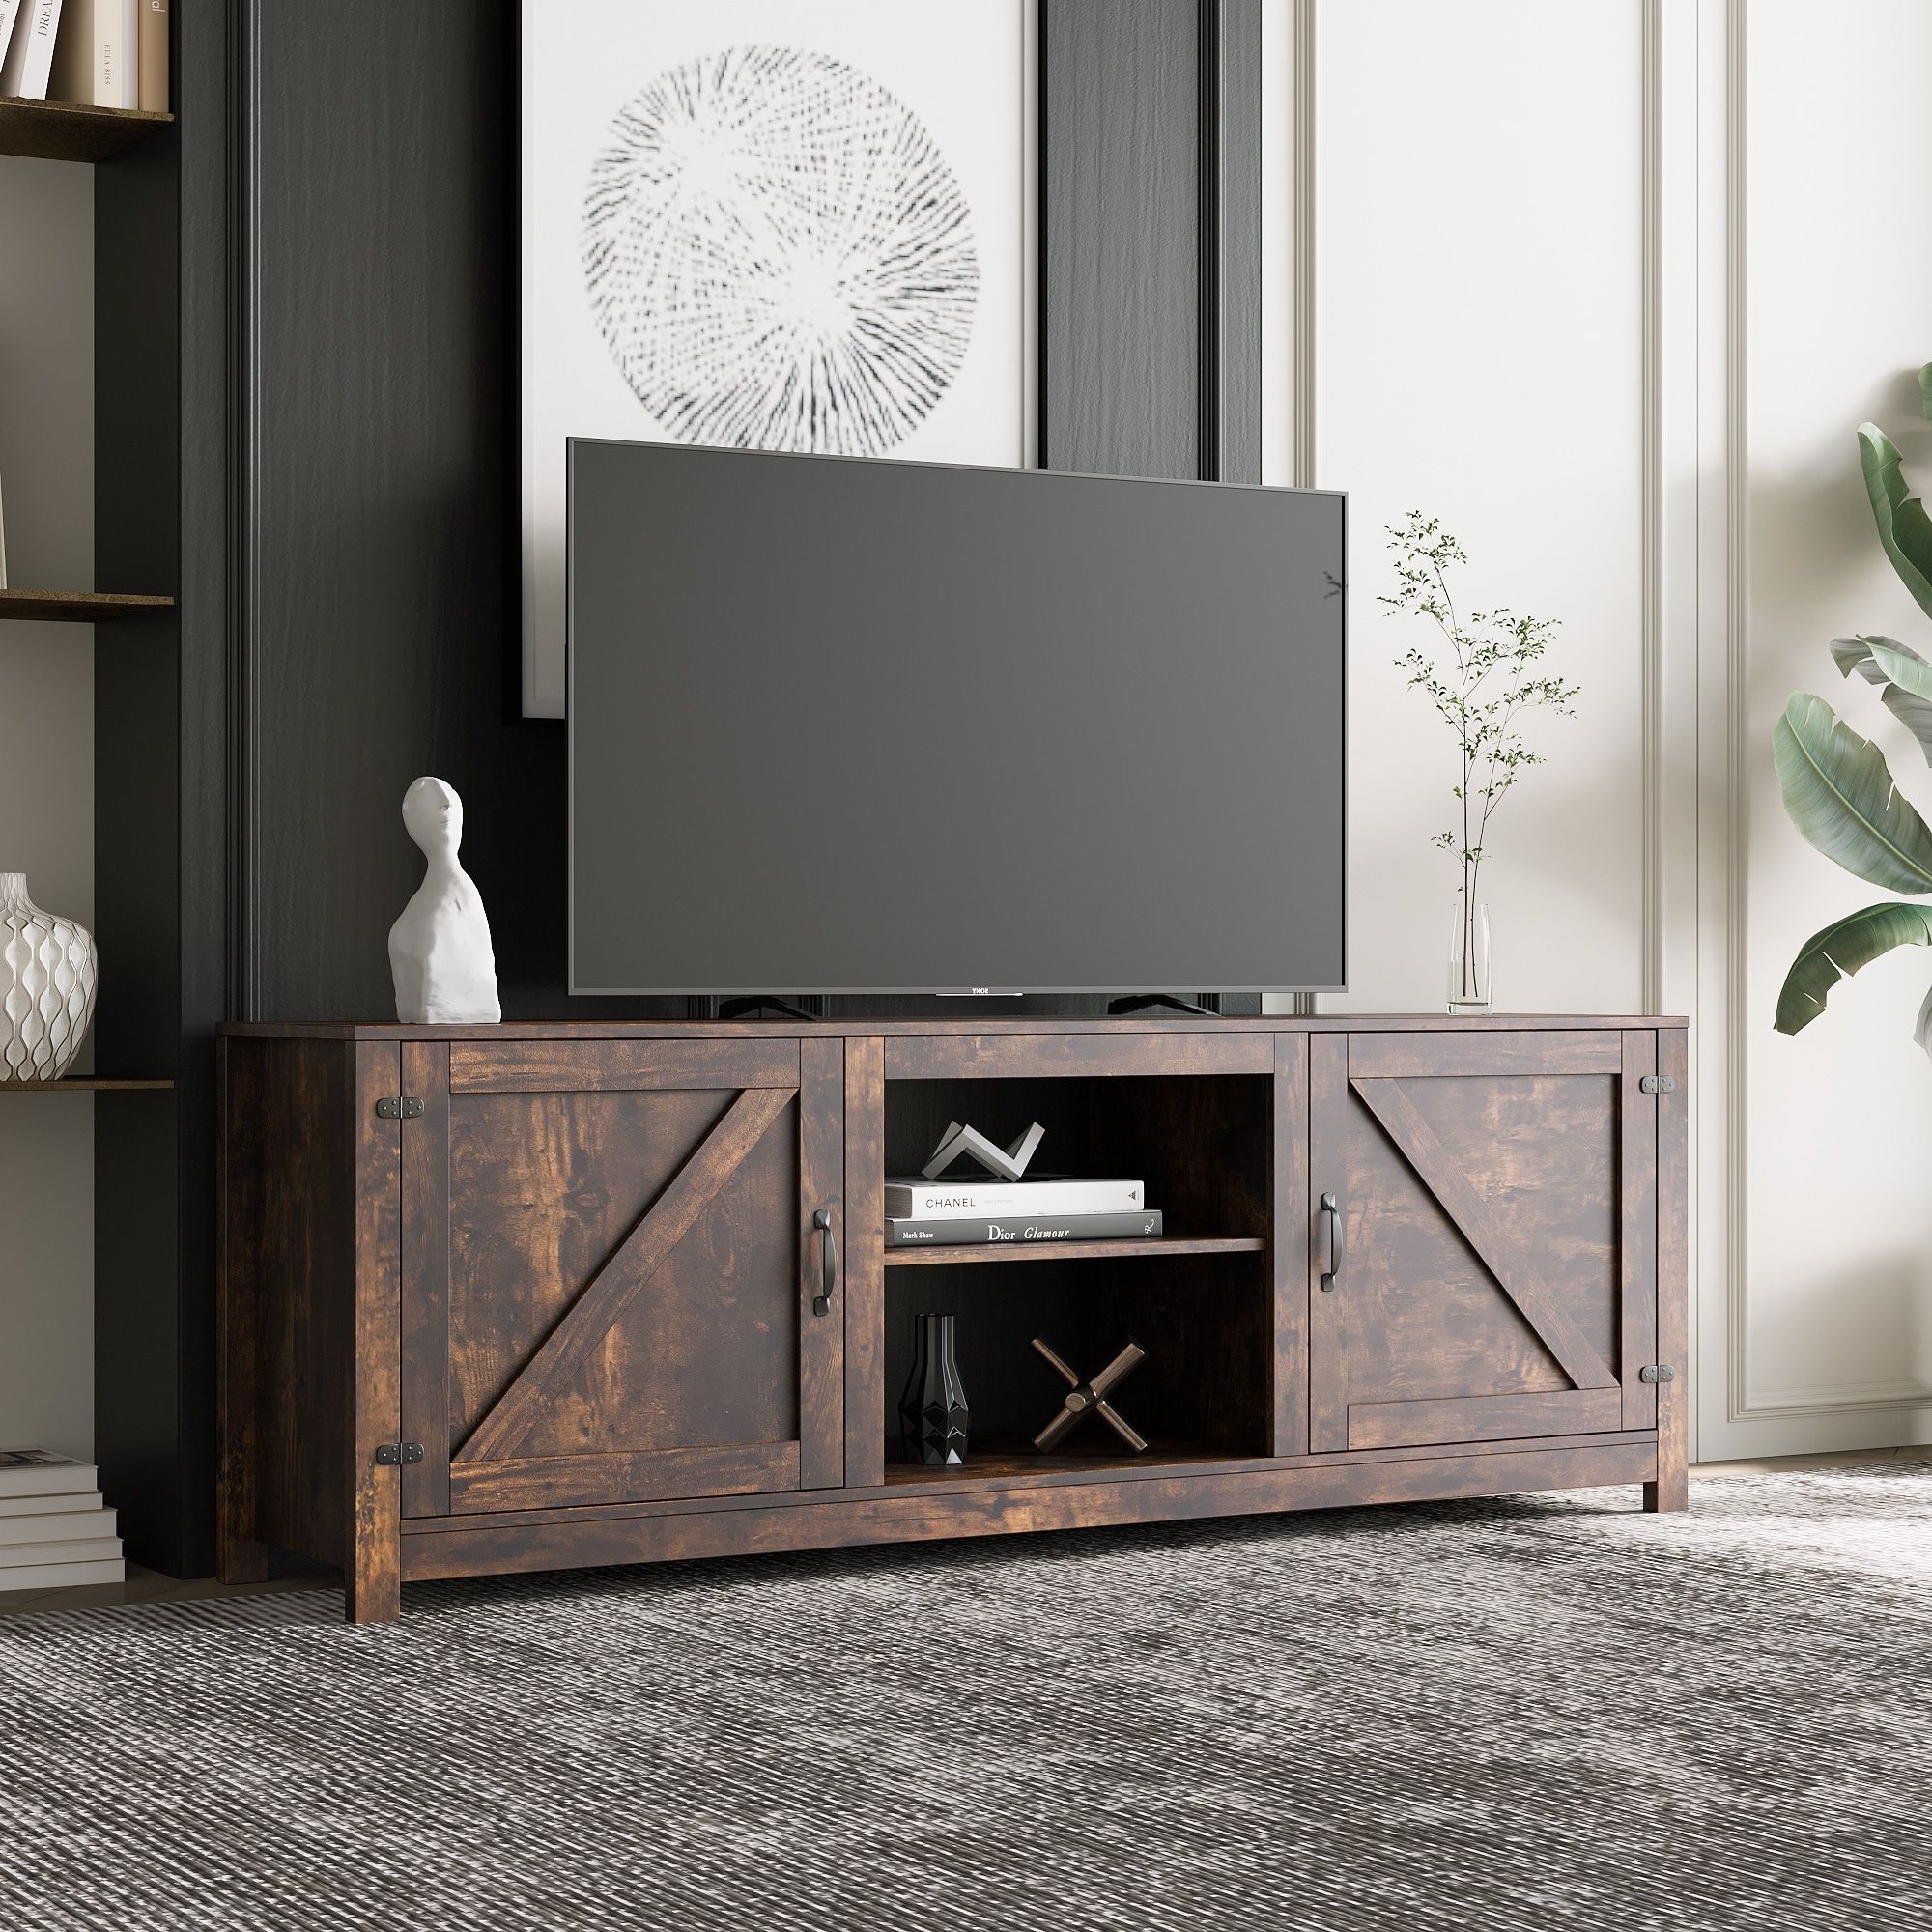 Farmhouse Style Tv Stand, Wood Entertainment Center Media Console With 2  Shelves 2 Drawers – Bed Bath & Beyond – 37853671 Within Farmhouse Media Entertainment Centers (Gallery 8 of 20)